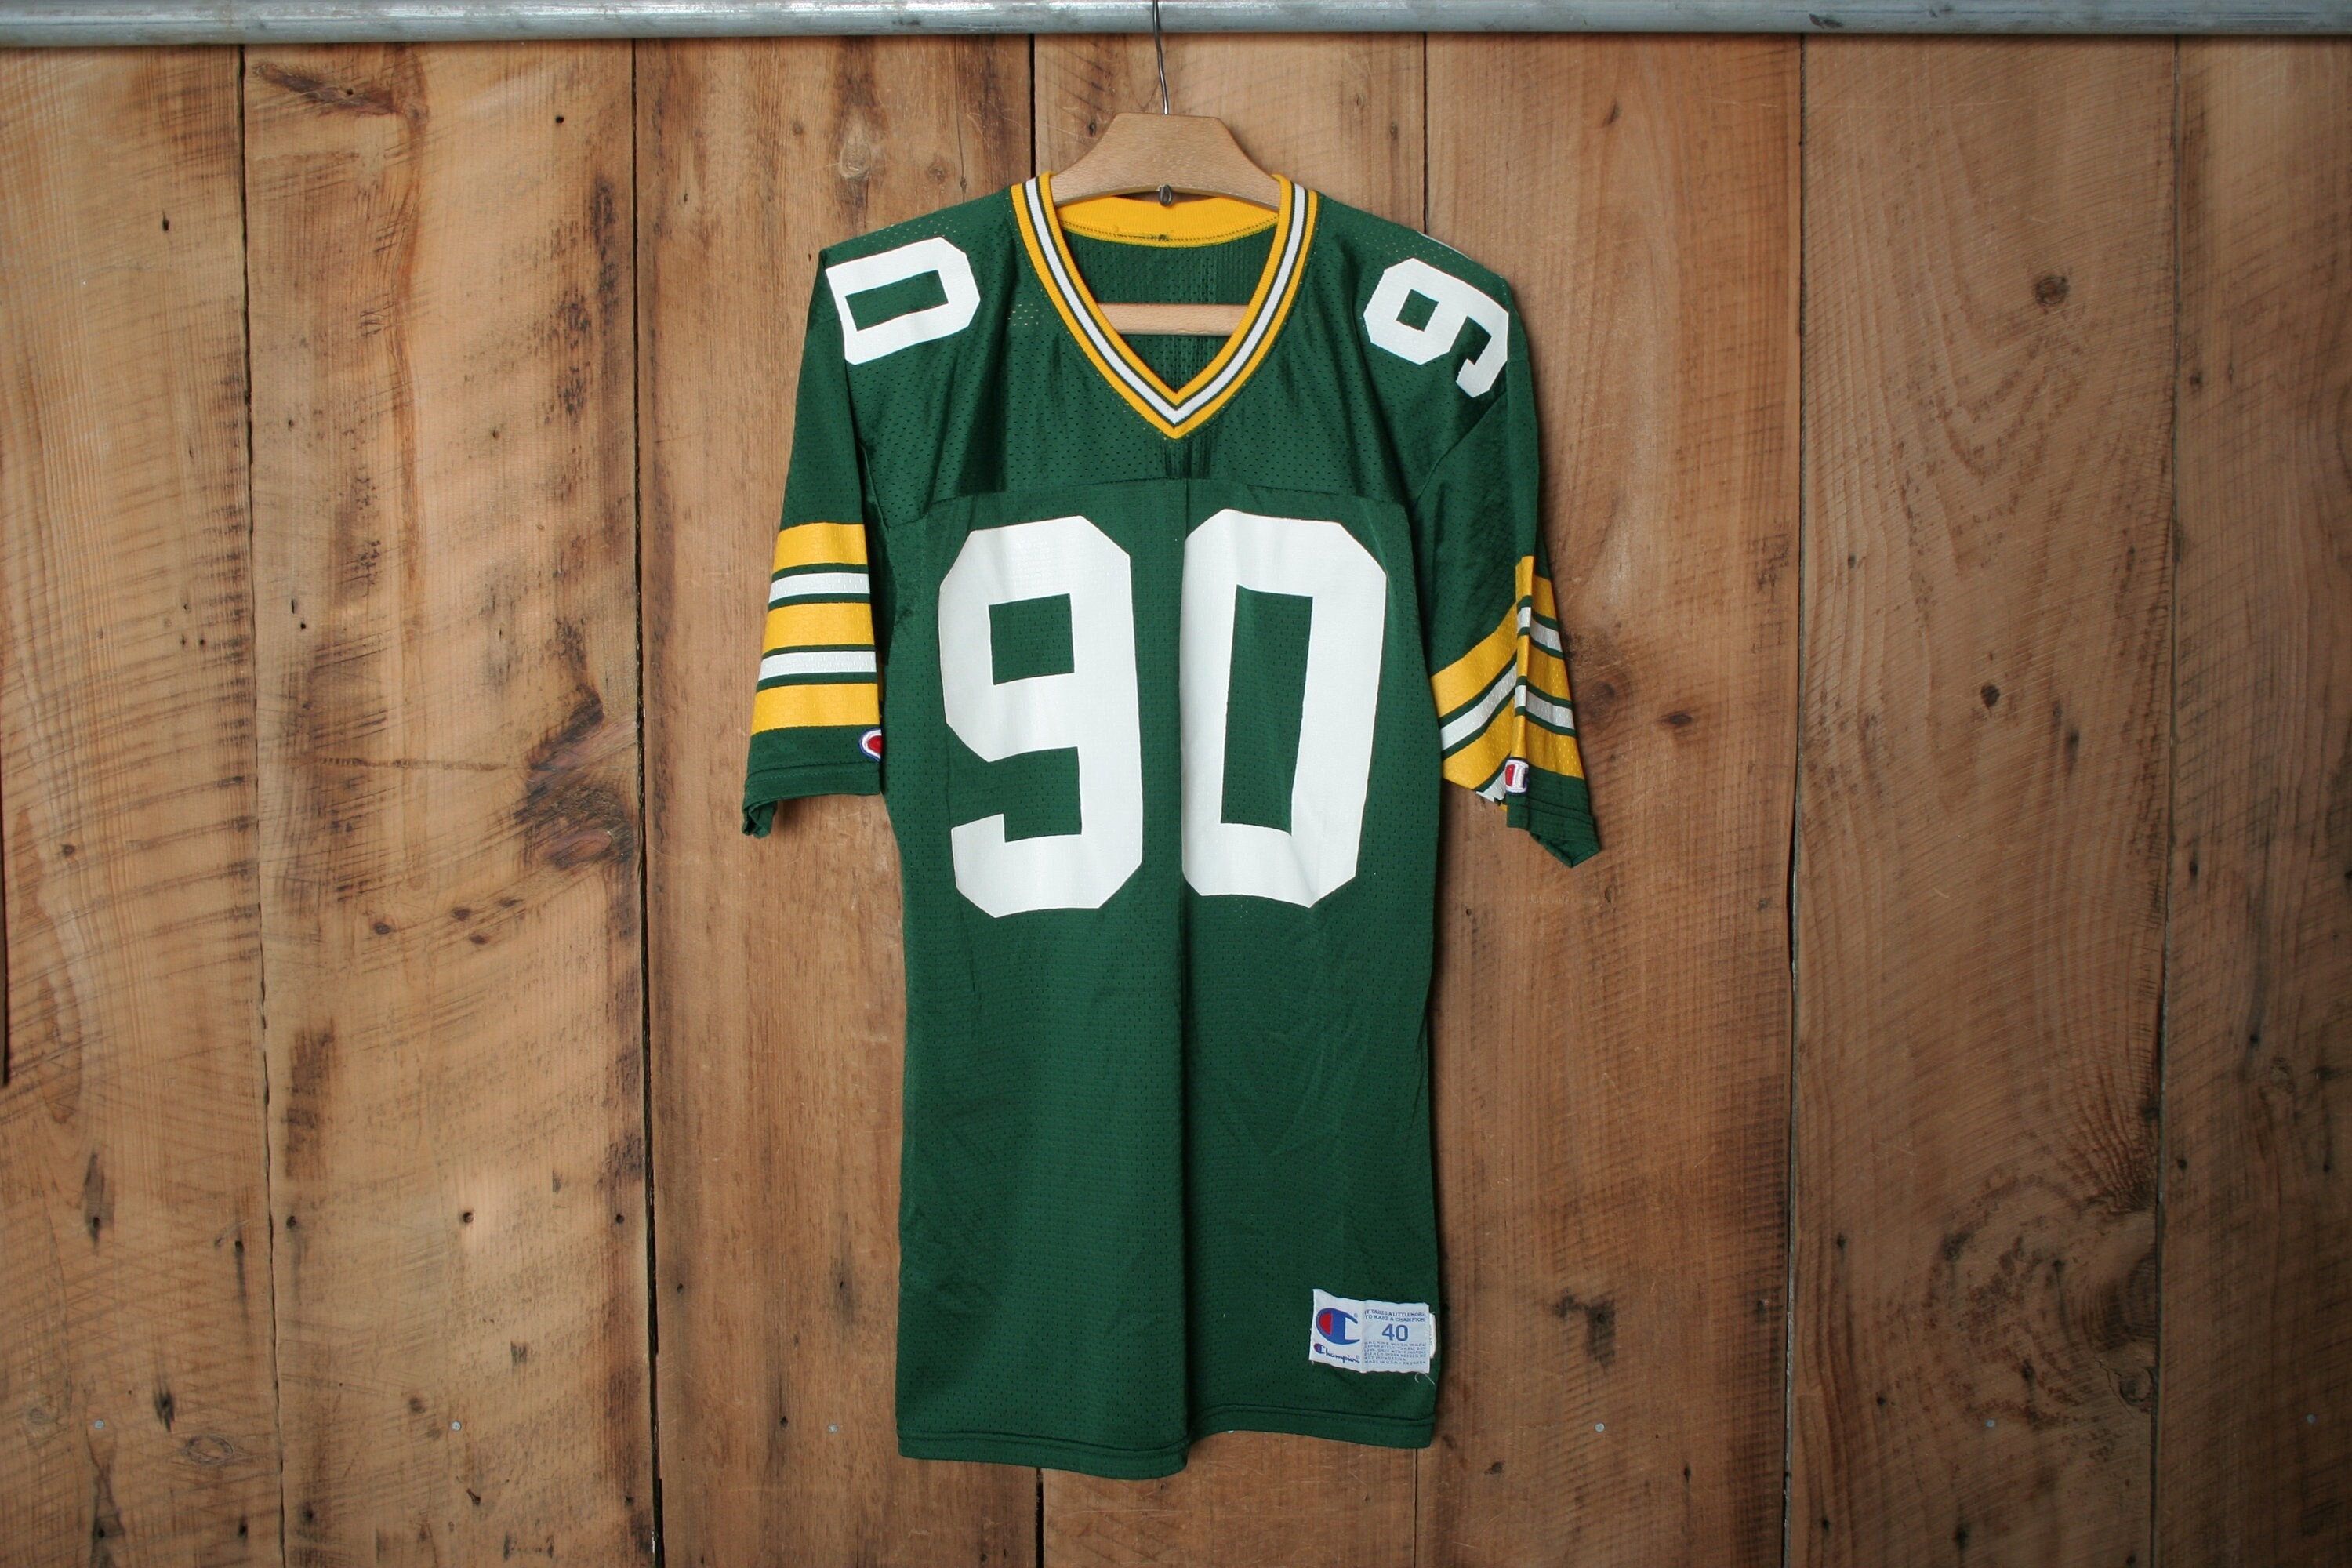 Vintage 90s Champion Green Bay Packers 21 jersey (52/XL/XXL) – The